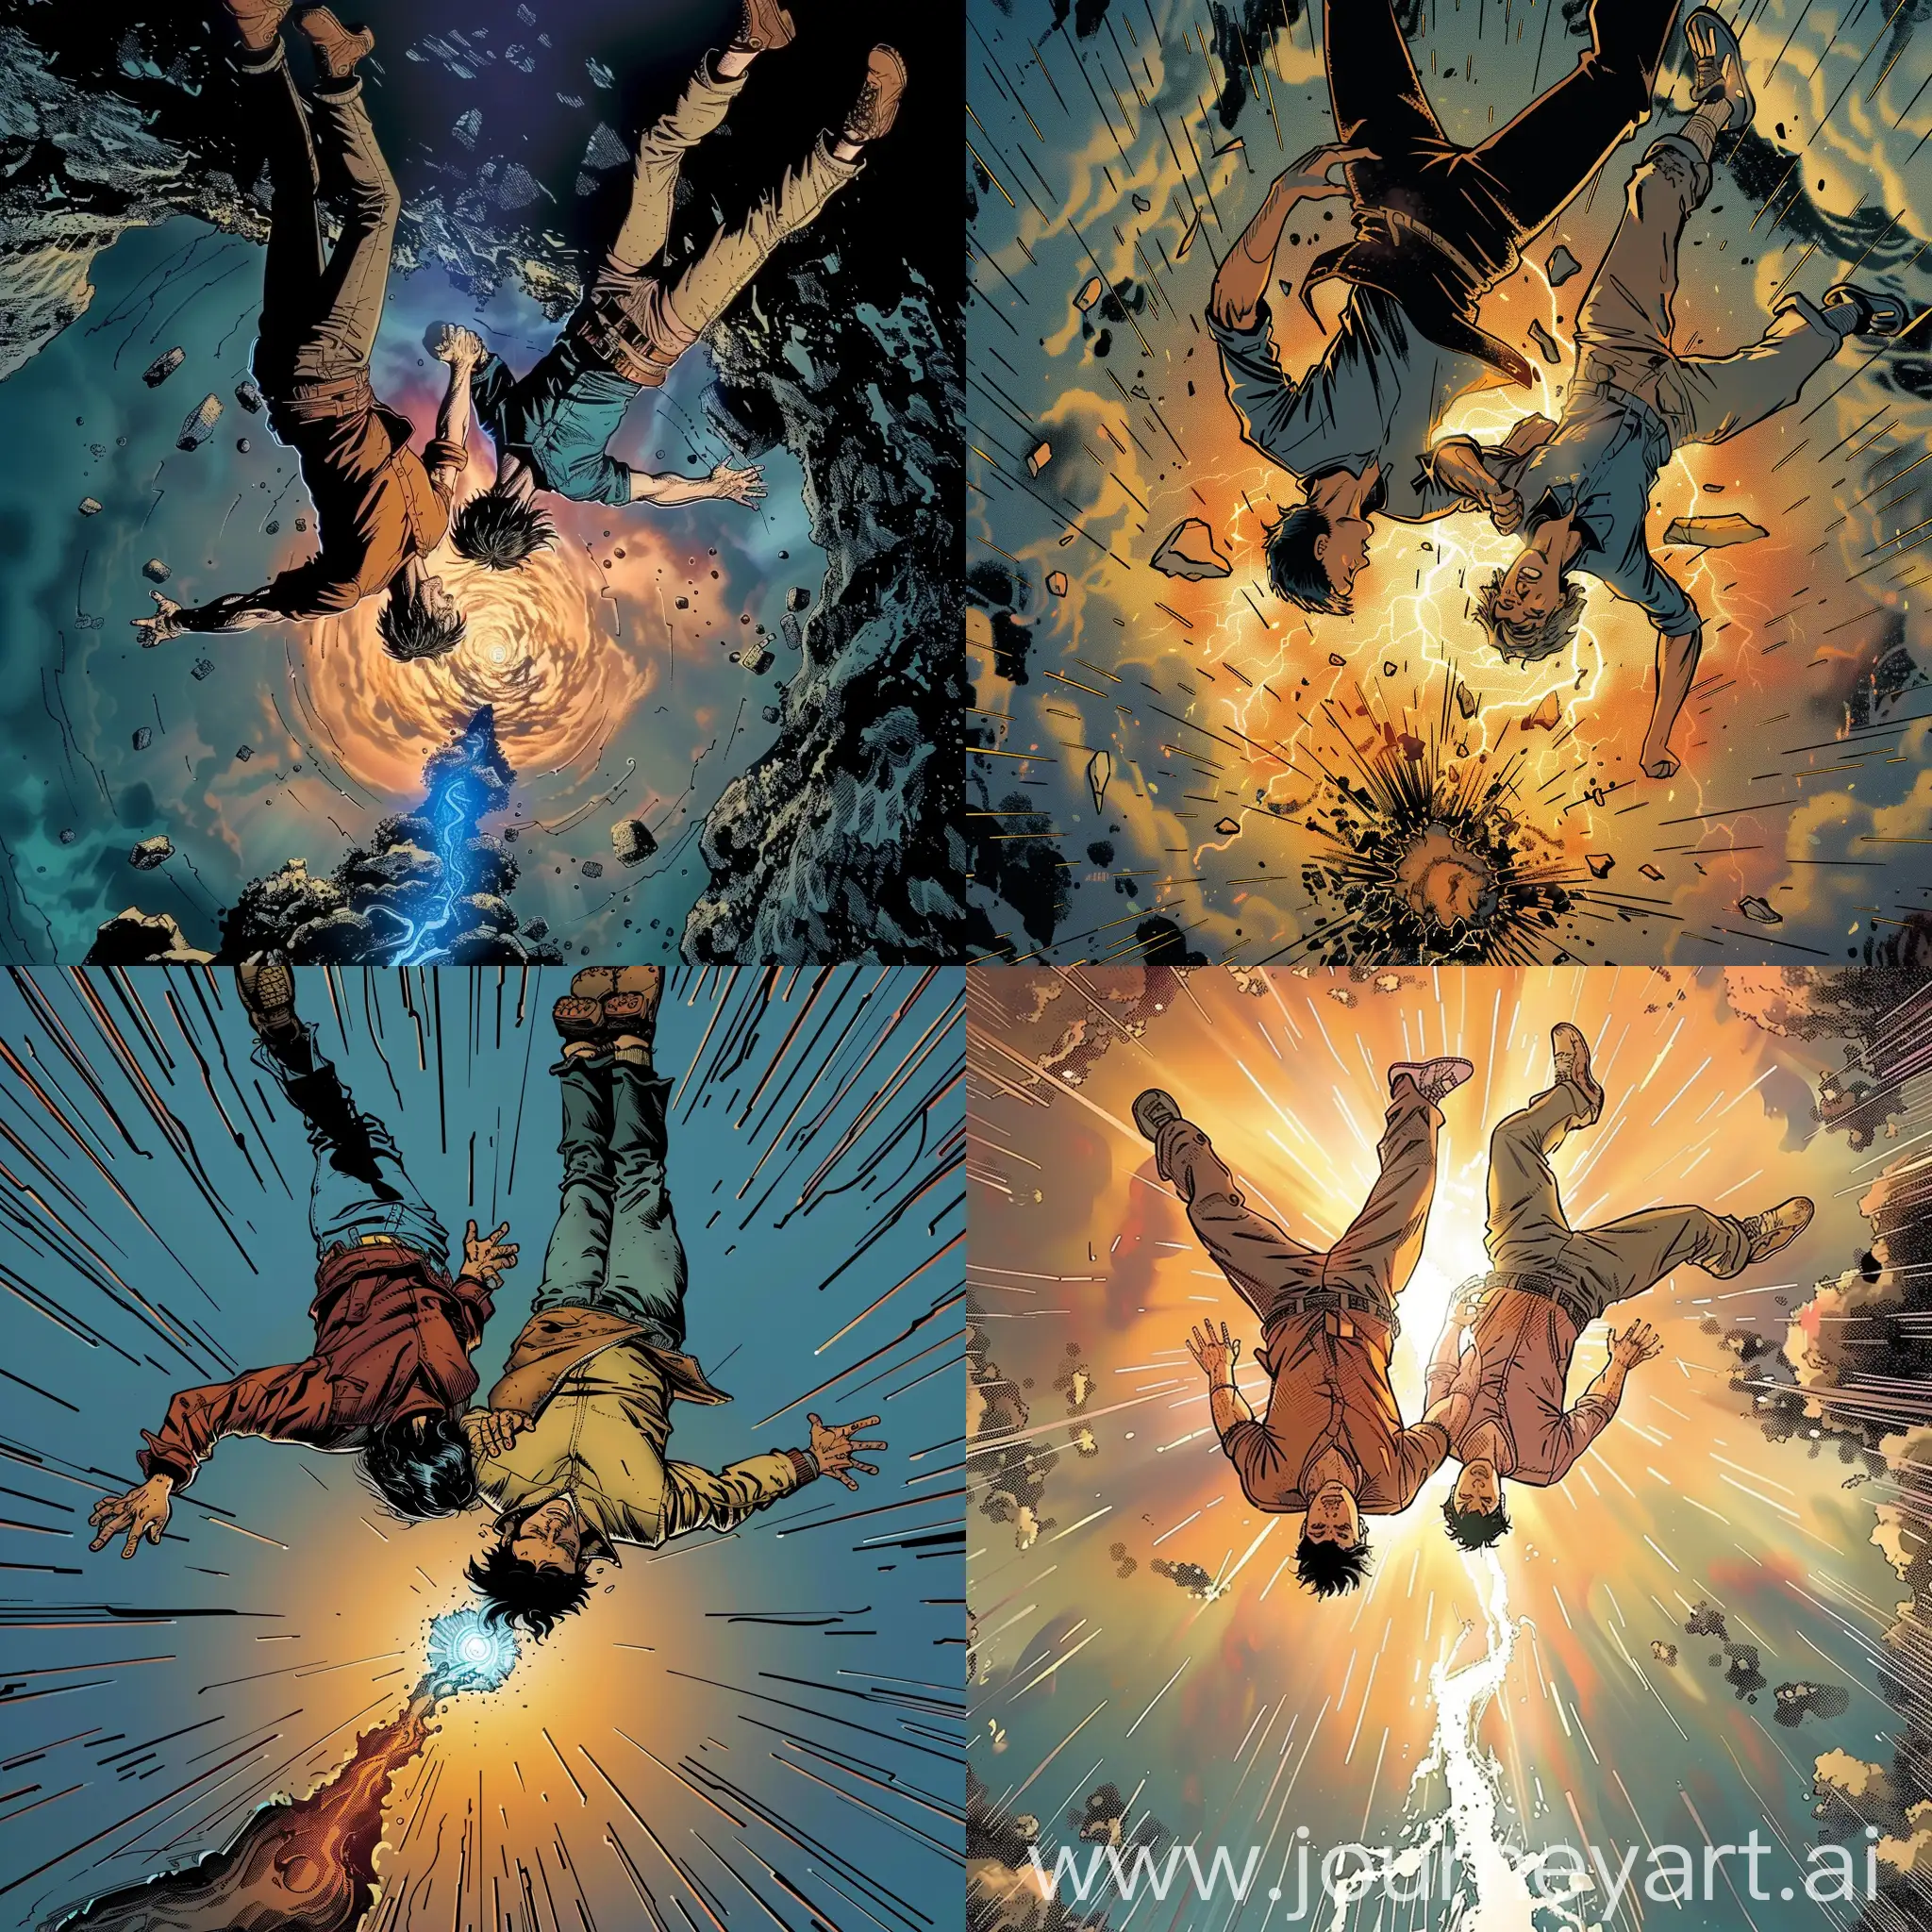 comic style, two guys fly upside down clutching each other, a rift in the time continuum occurs below